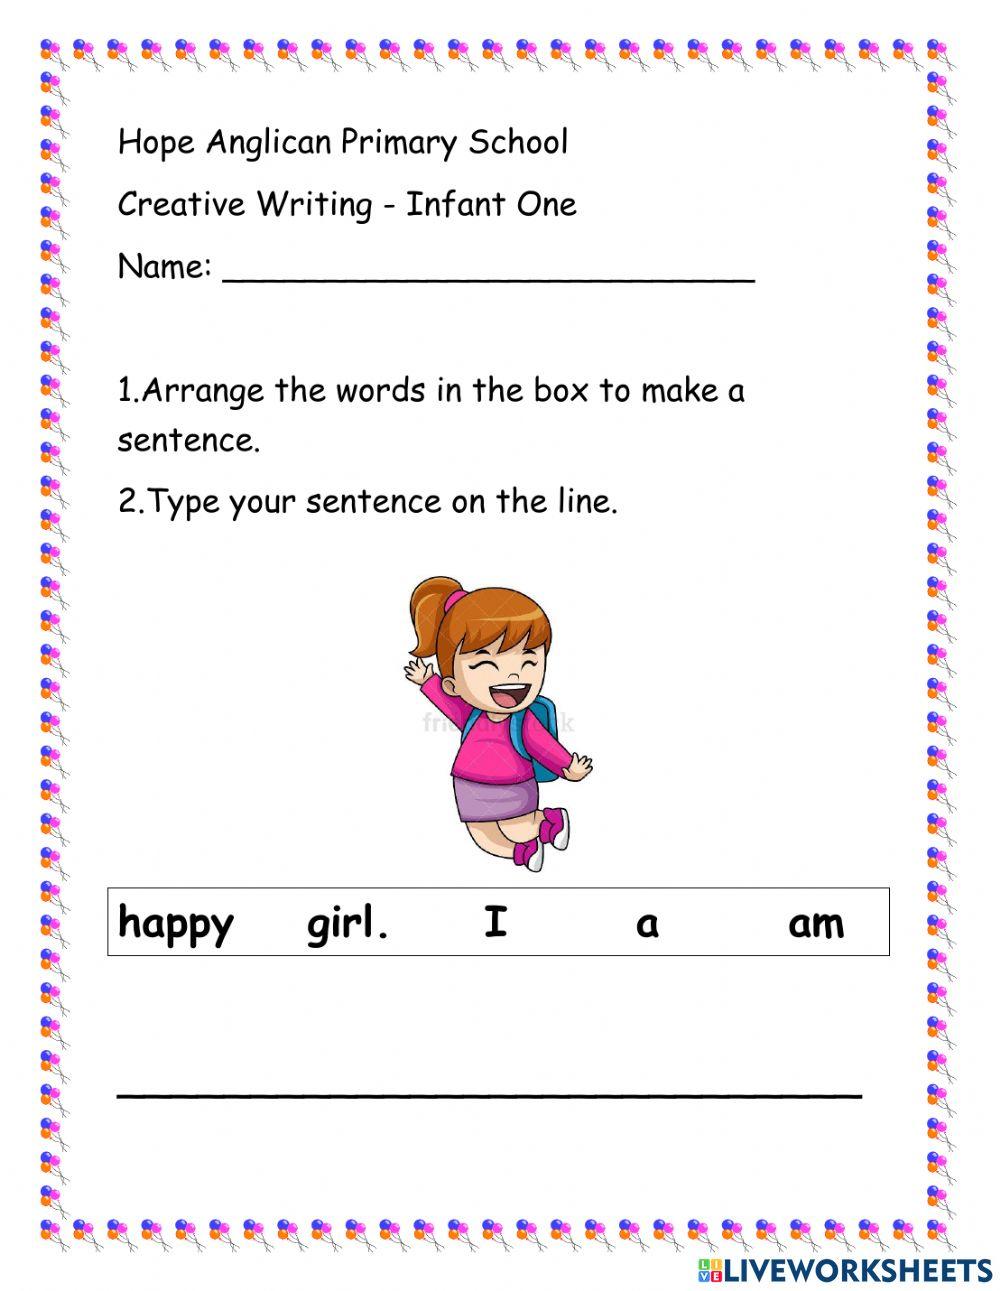 creative writing worksheets for class 1